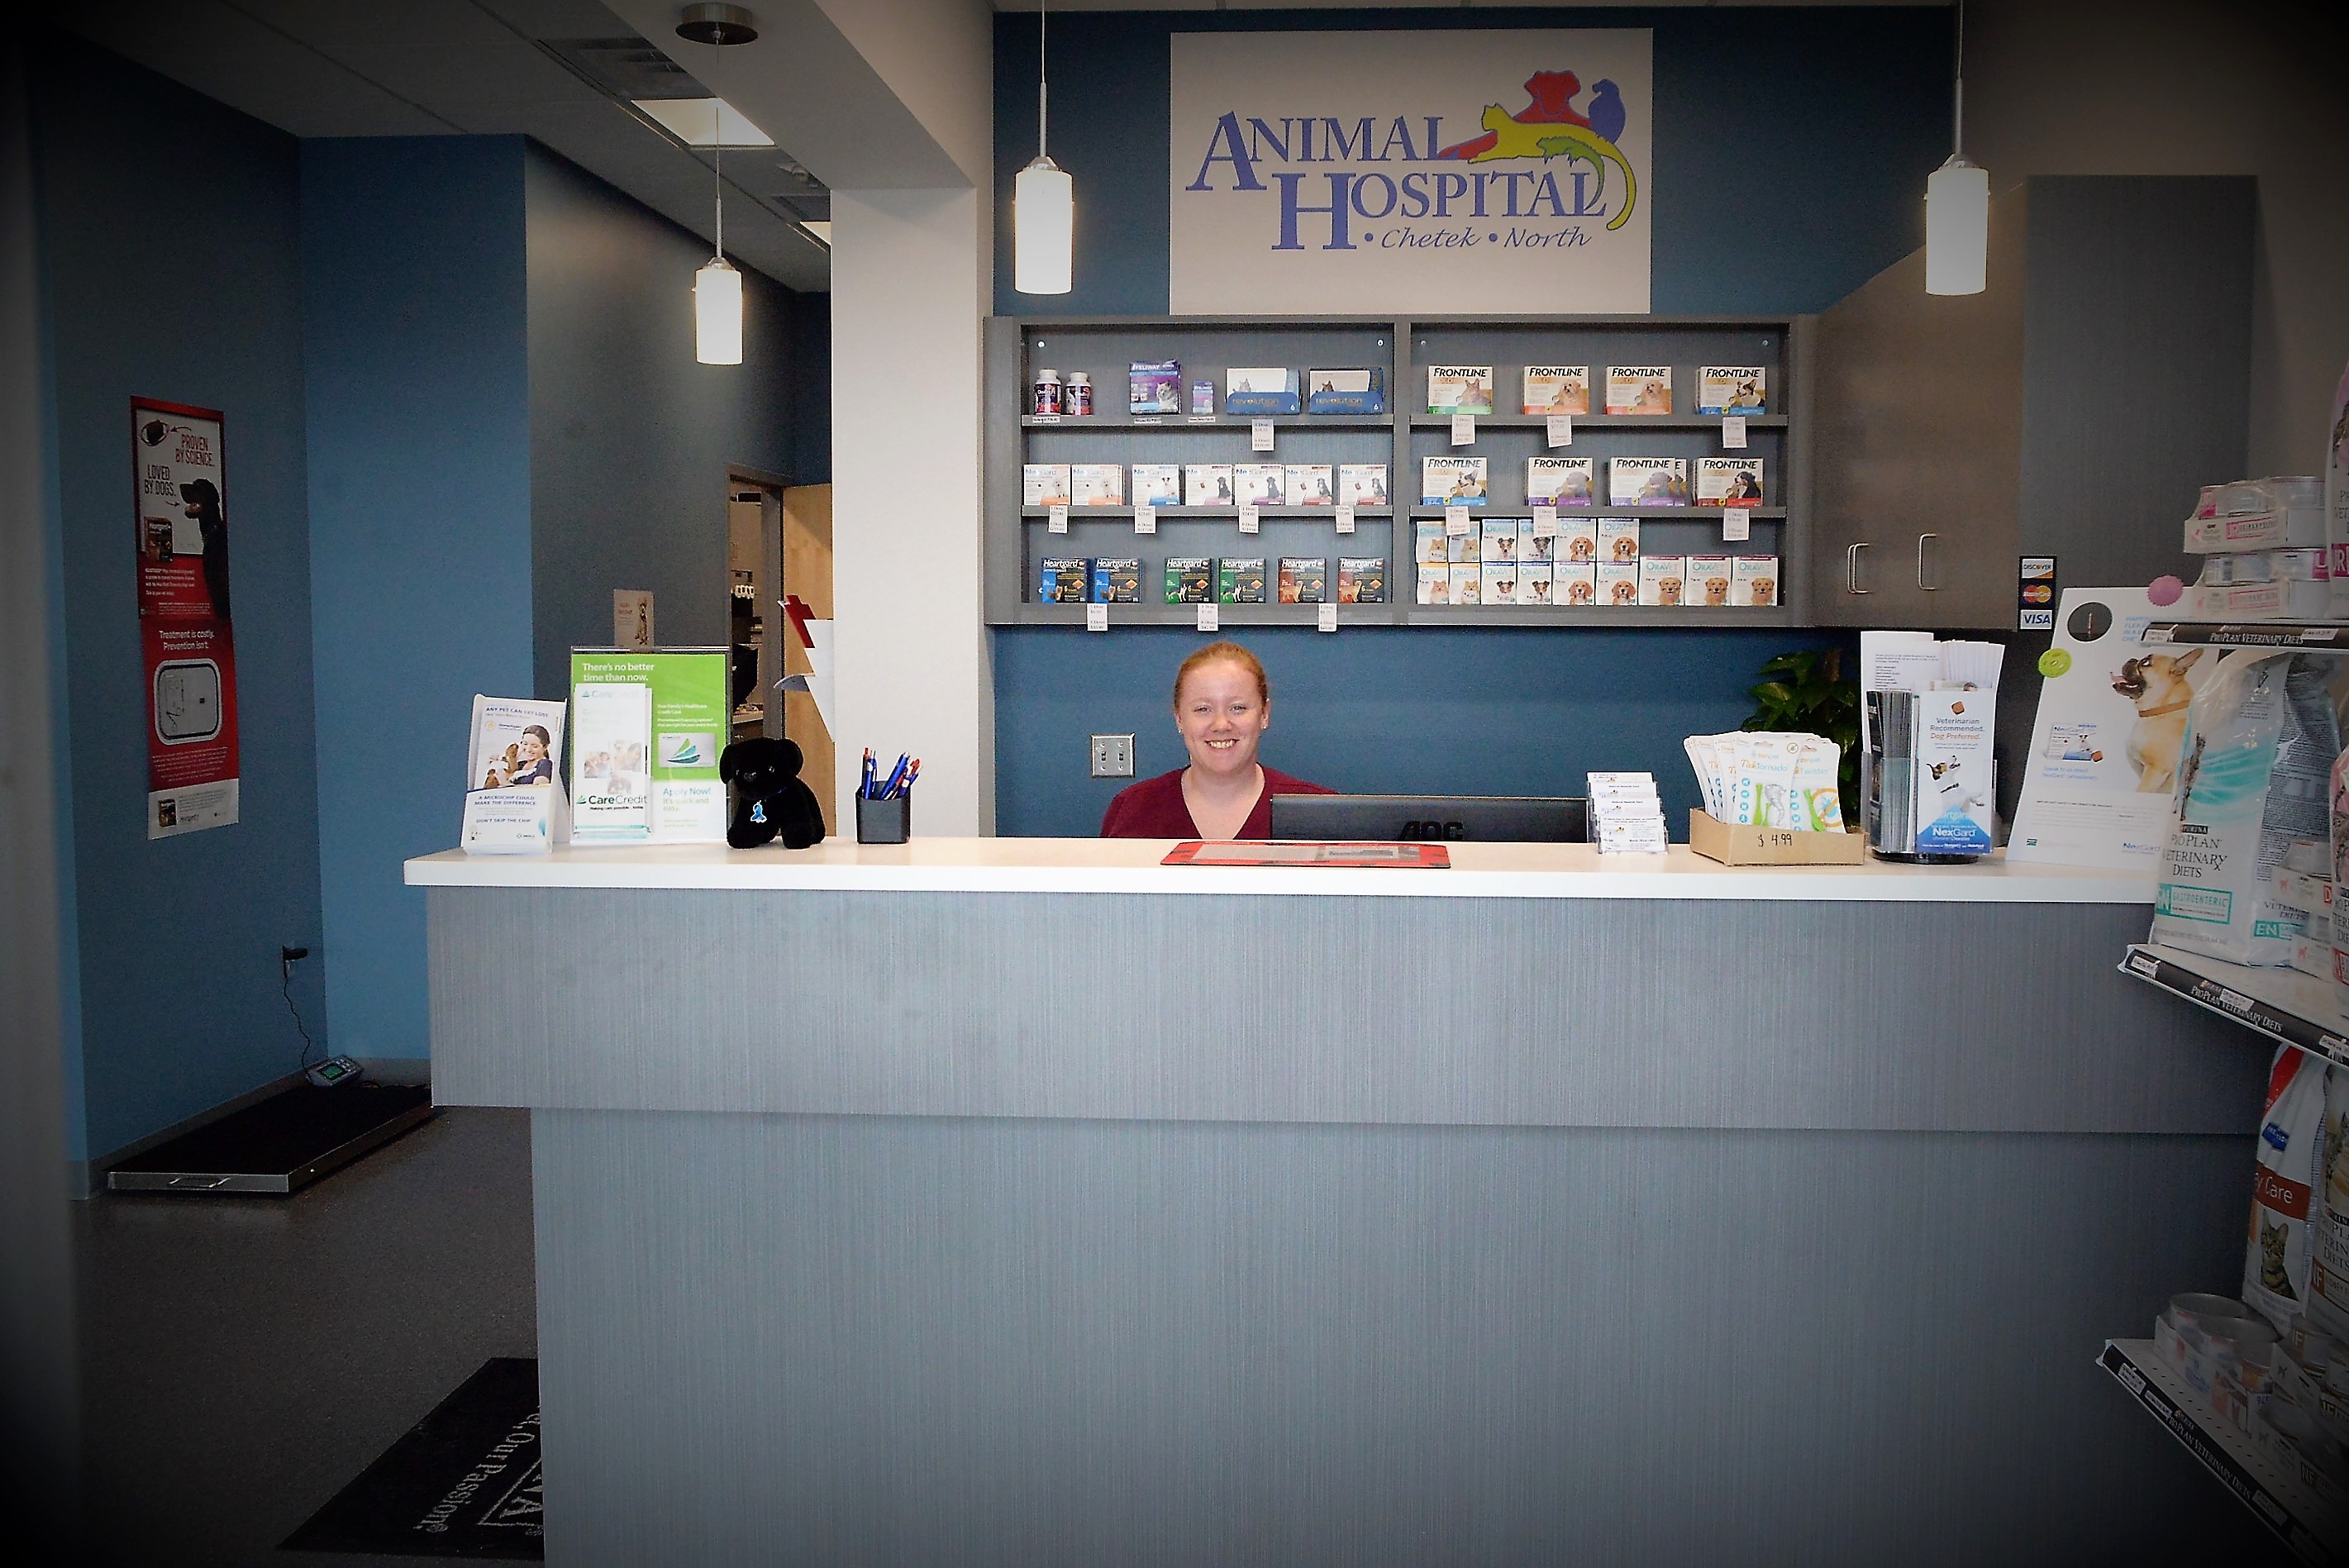 Welcome to the Animal Hosptial North in Rice Lake WI. Built in 2017 with your pet in mind this hospital features modern technology and a caring staff. Feel free to schedule a tour by calling 715-76-6650 or email us at animalhospitalnorth@gmail.com